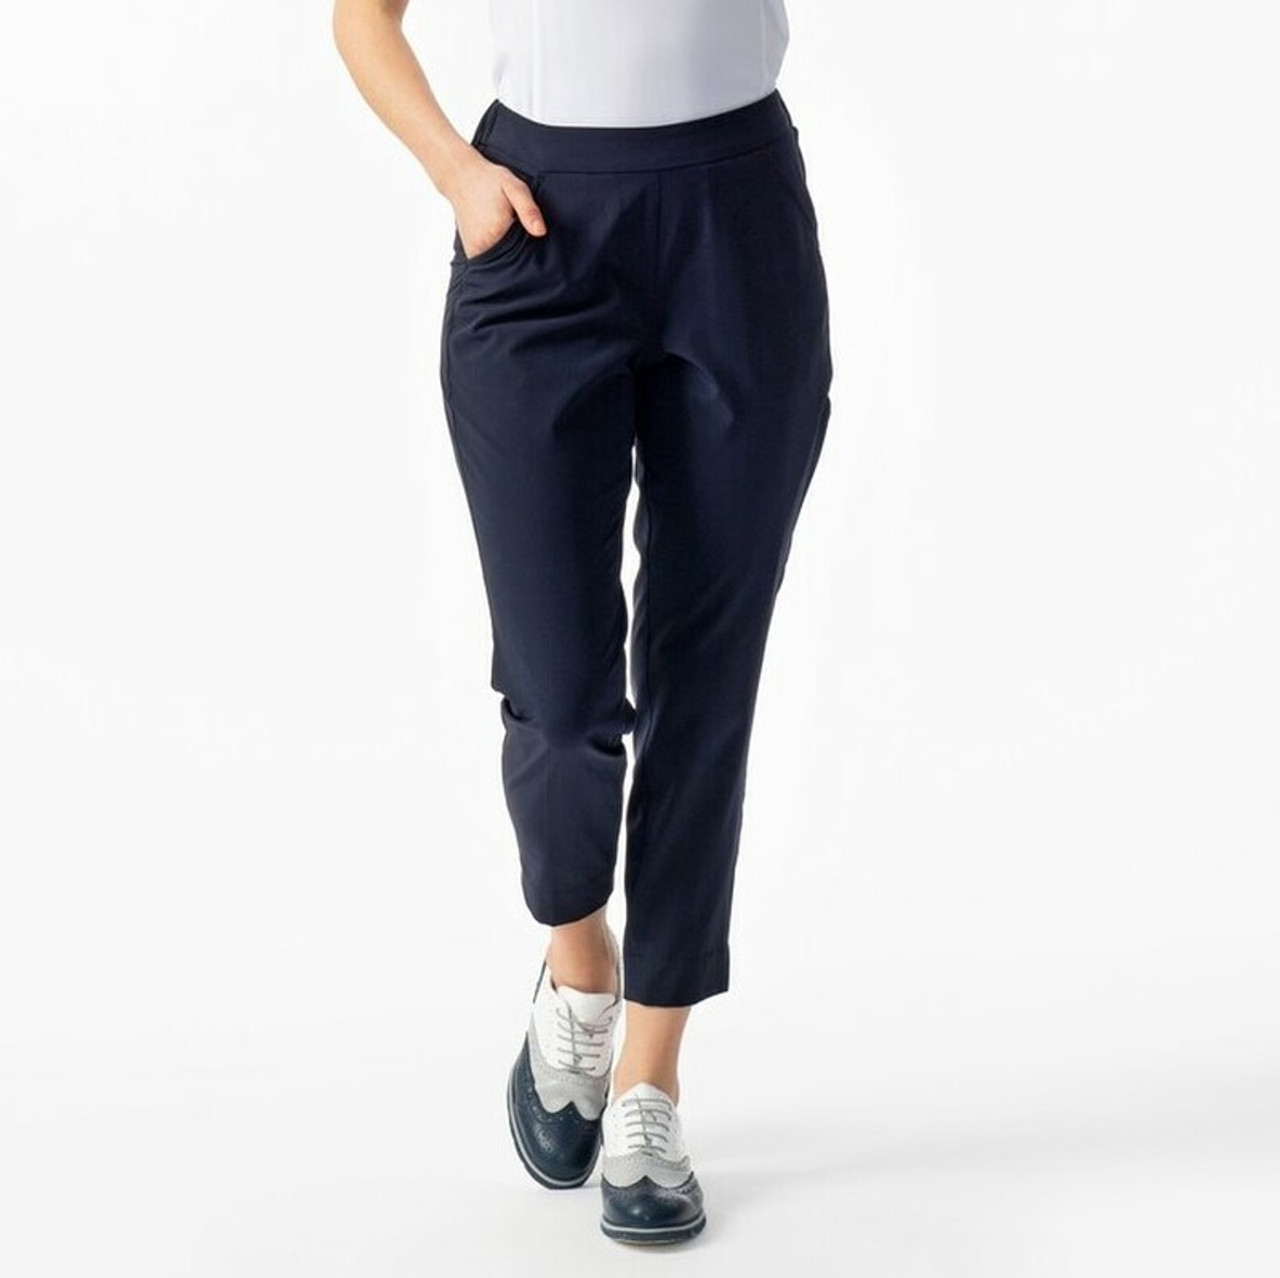 Daily Sports Sense High Water Women's Golf Pants - Navy - Fore Ladies -  Golf Dresses and Clothes, Tennis Skirts and Outfits, and Fashionable  Activewear